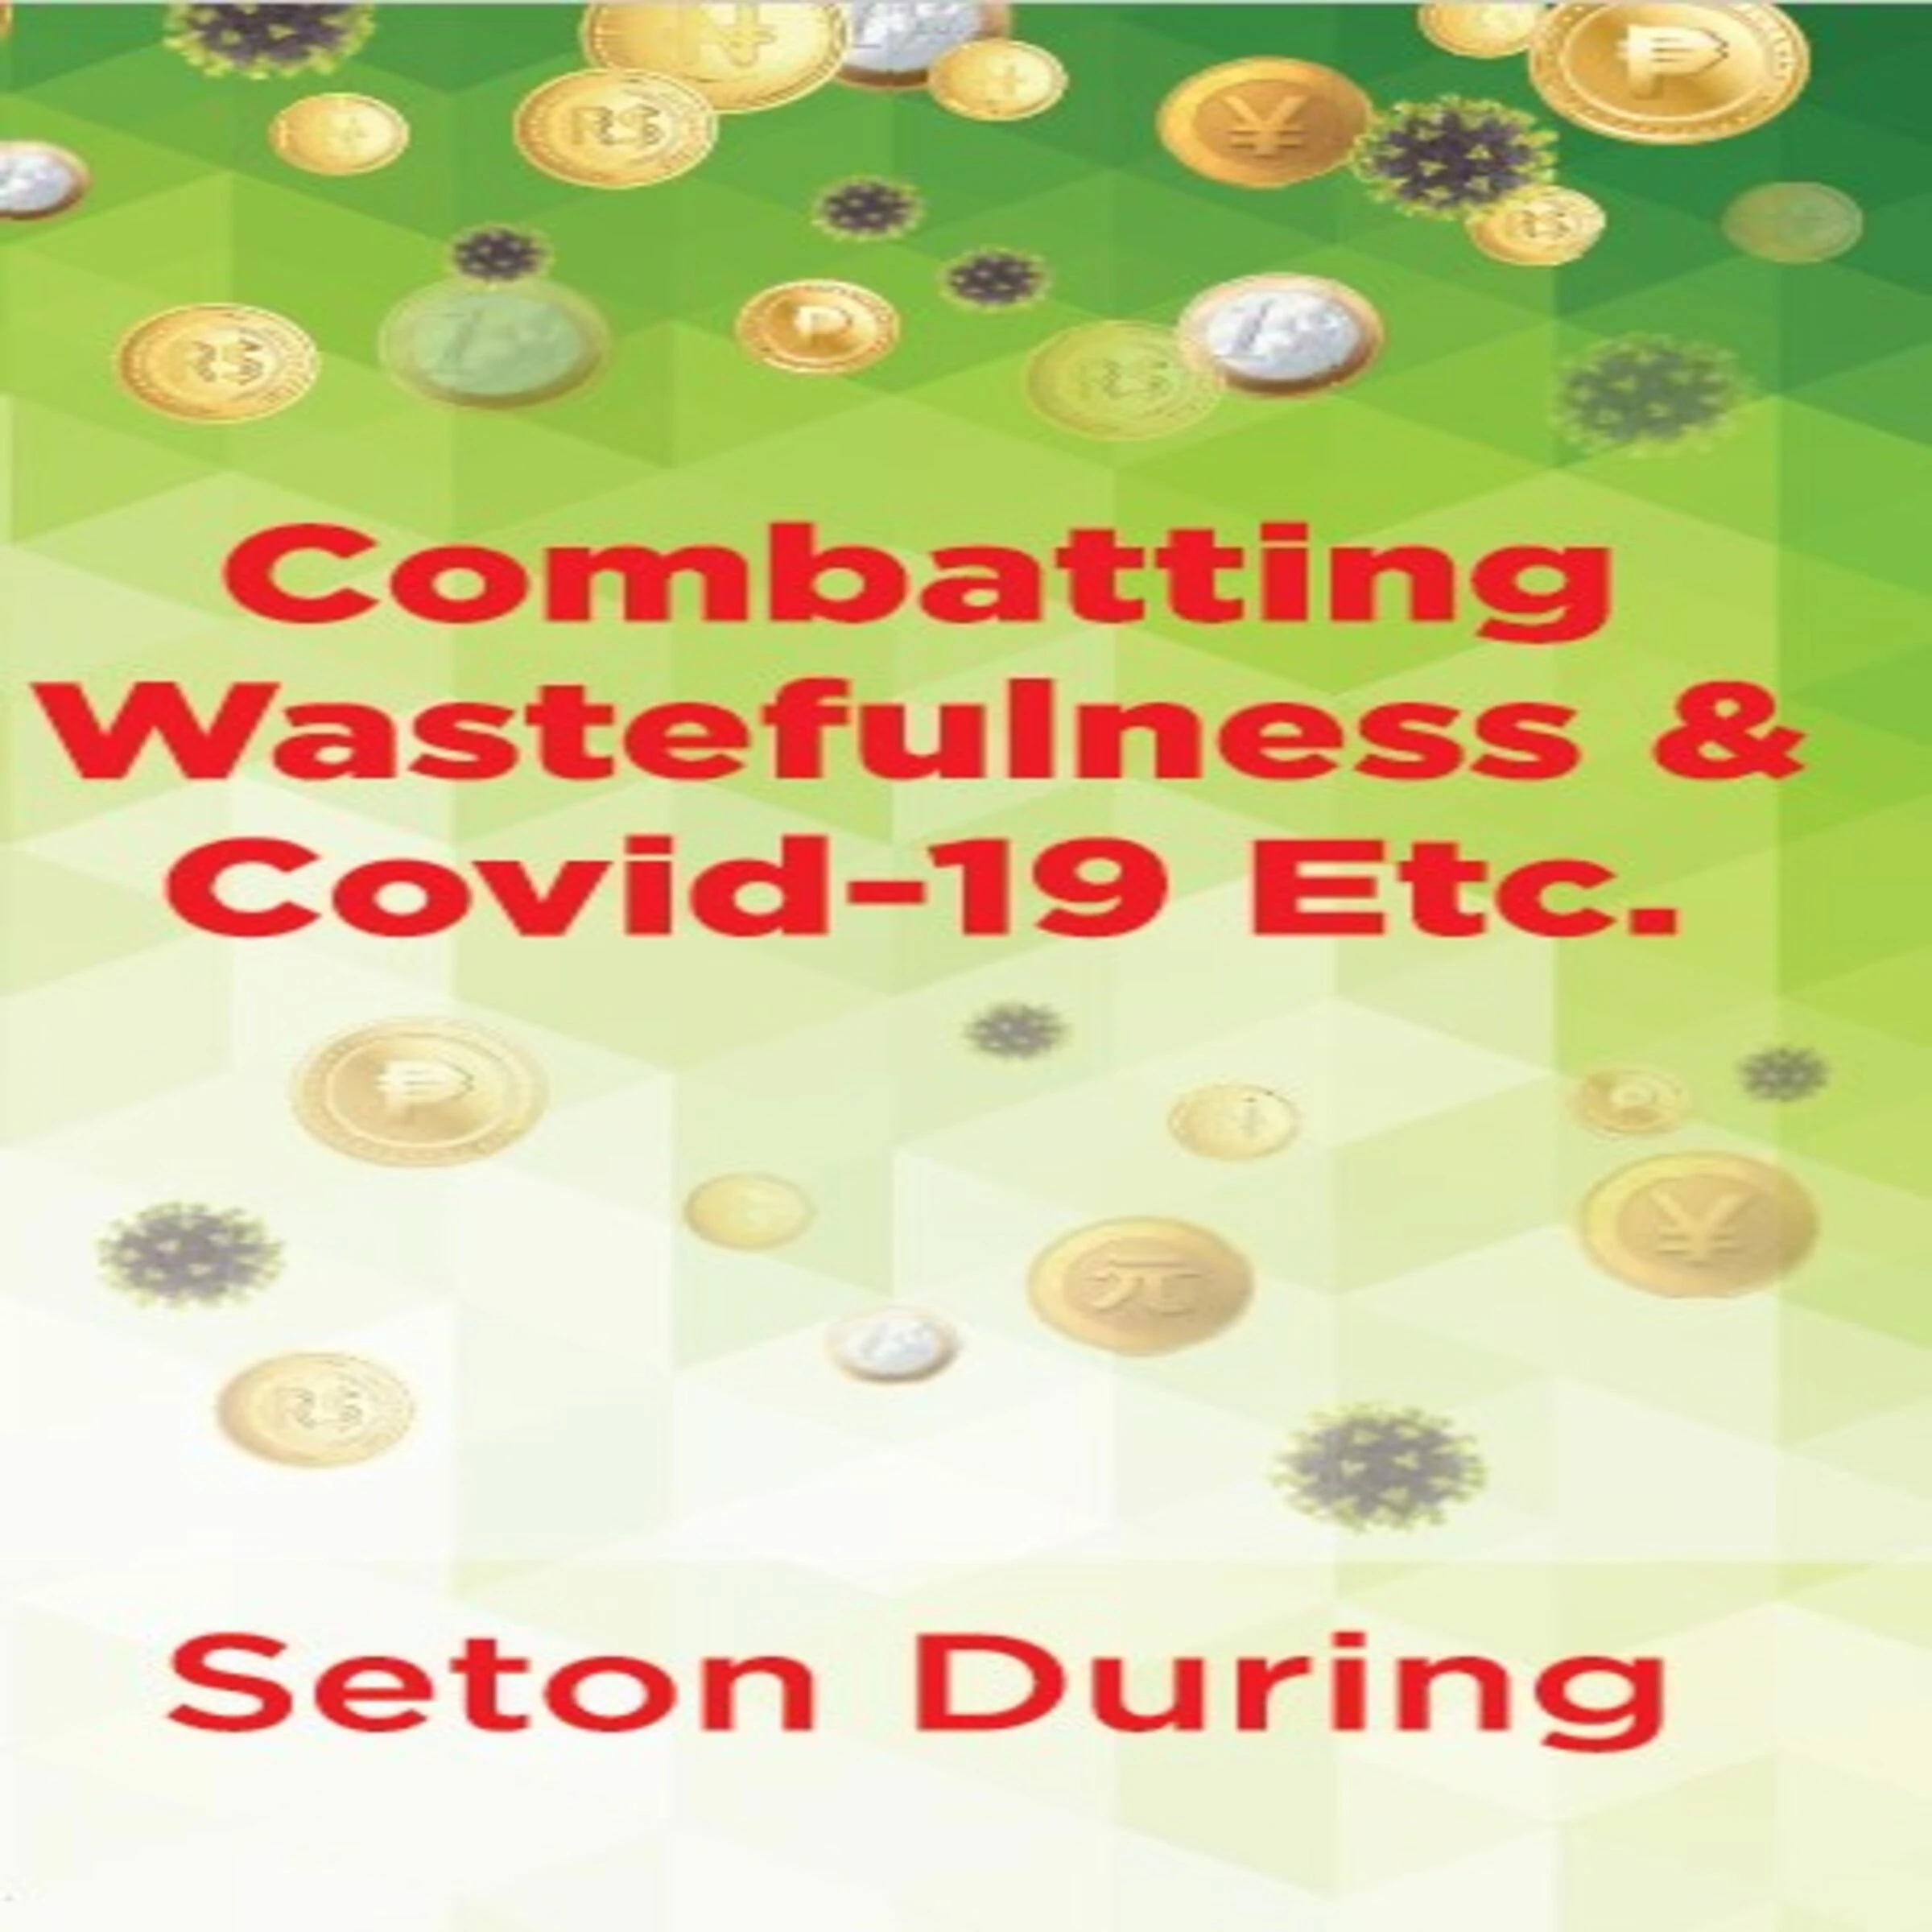 Combatting Wastefulness & Covid-19 Etc. by Seton During Audiobook